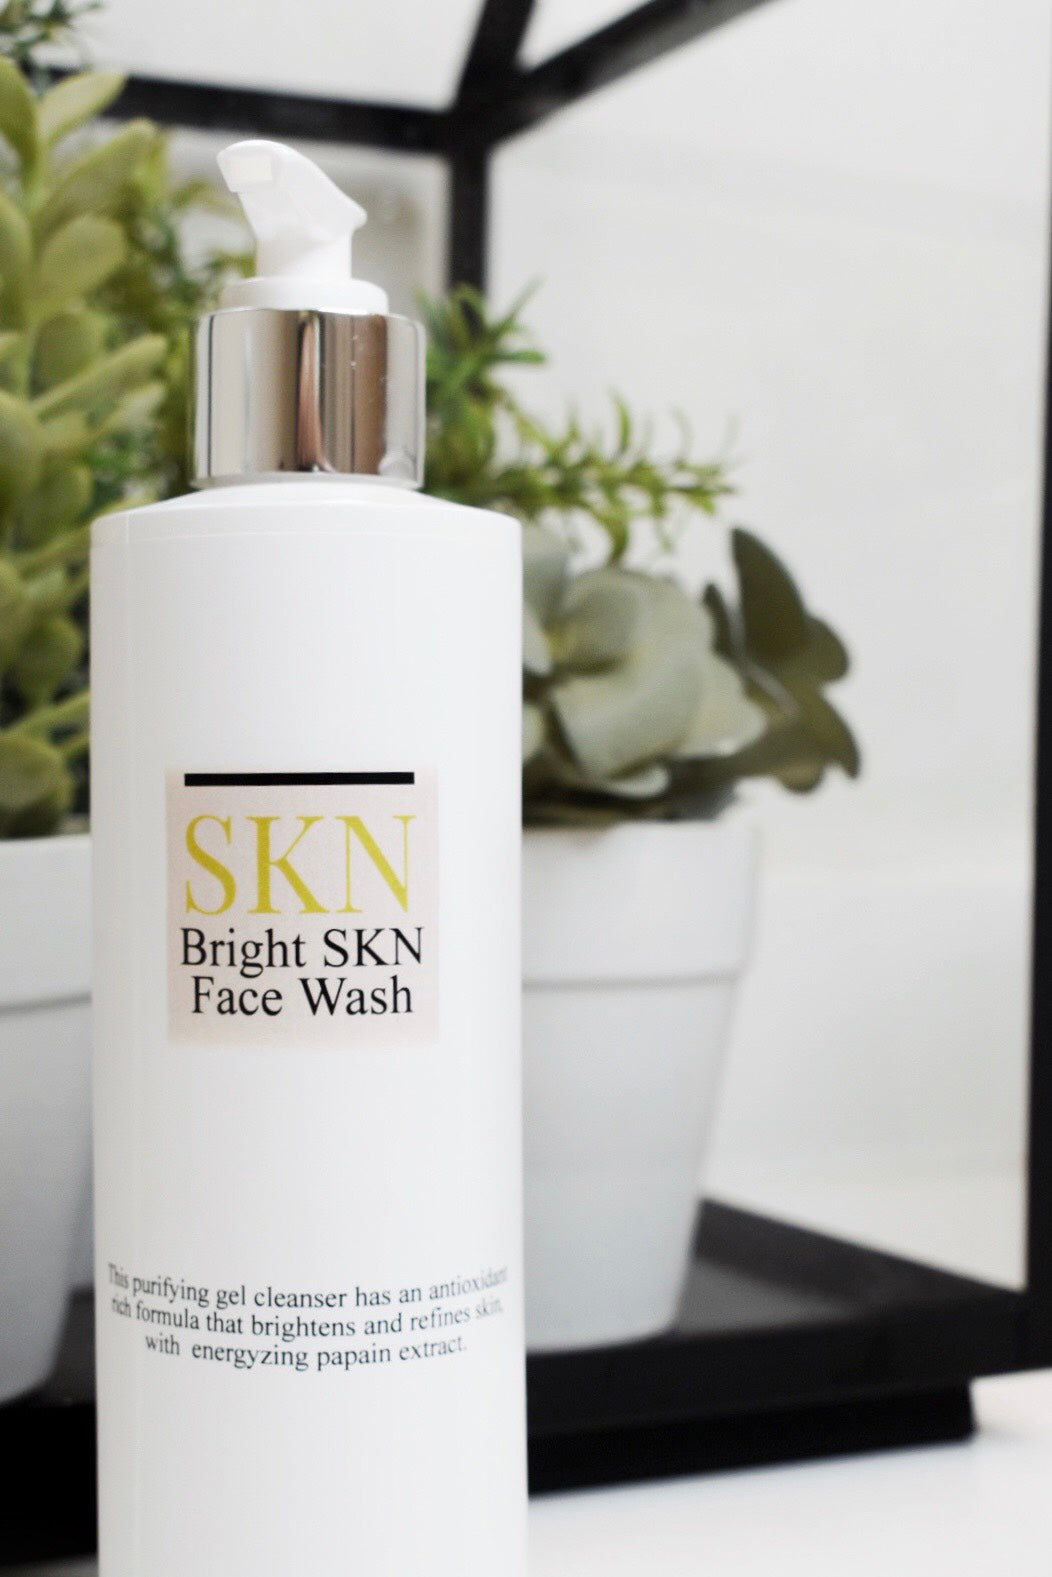 Bright SKN Face Wash